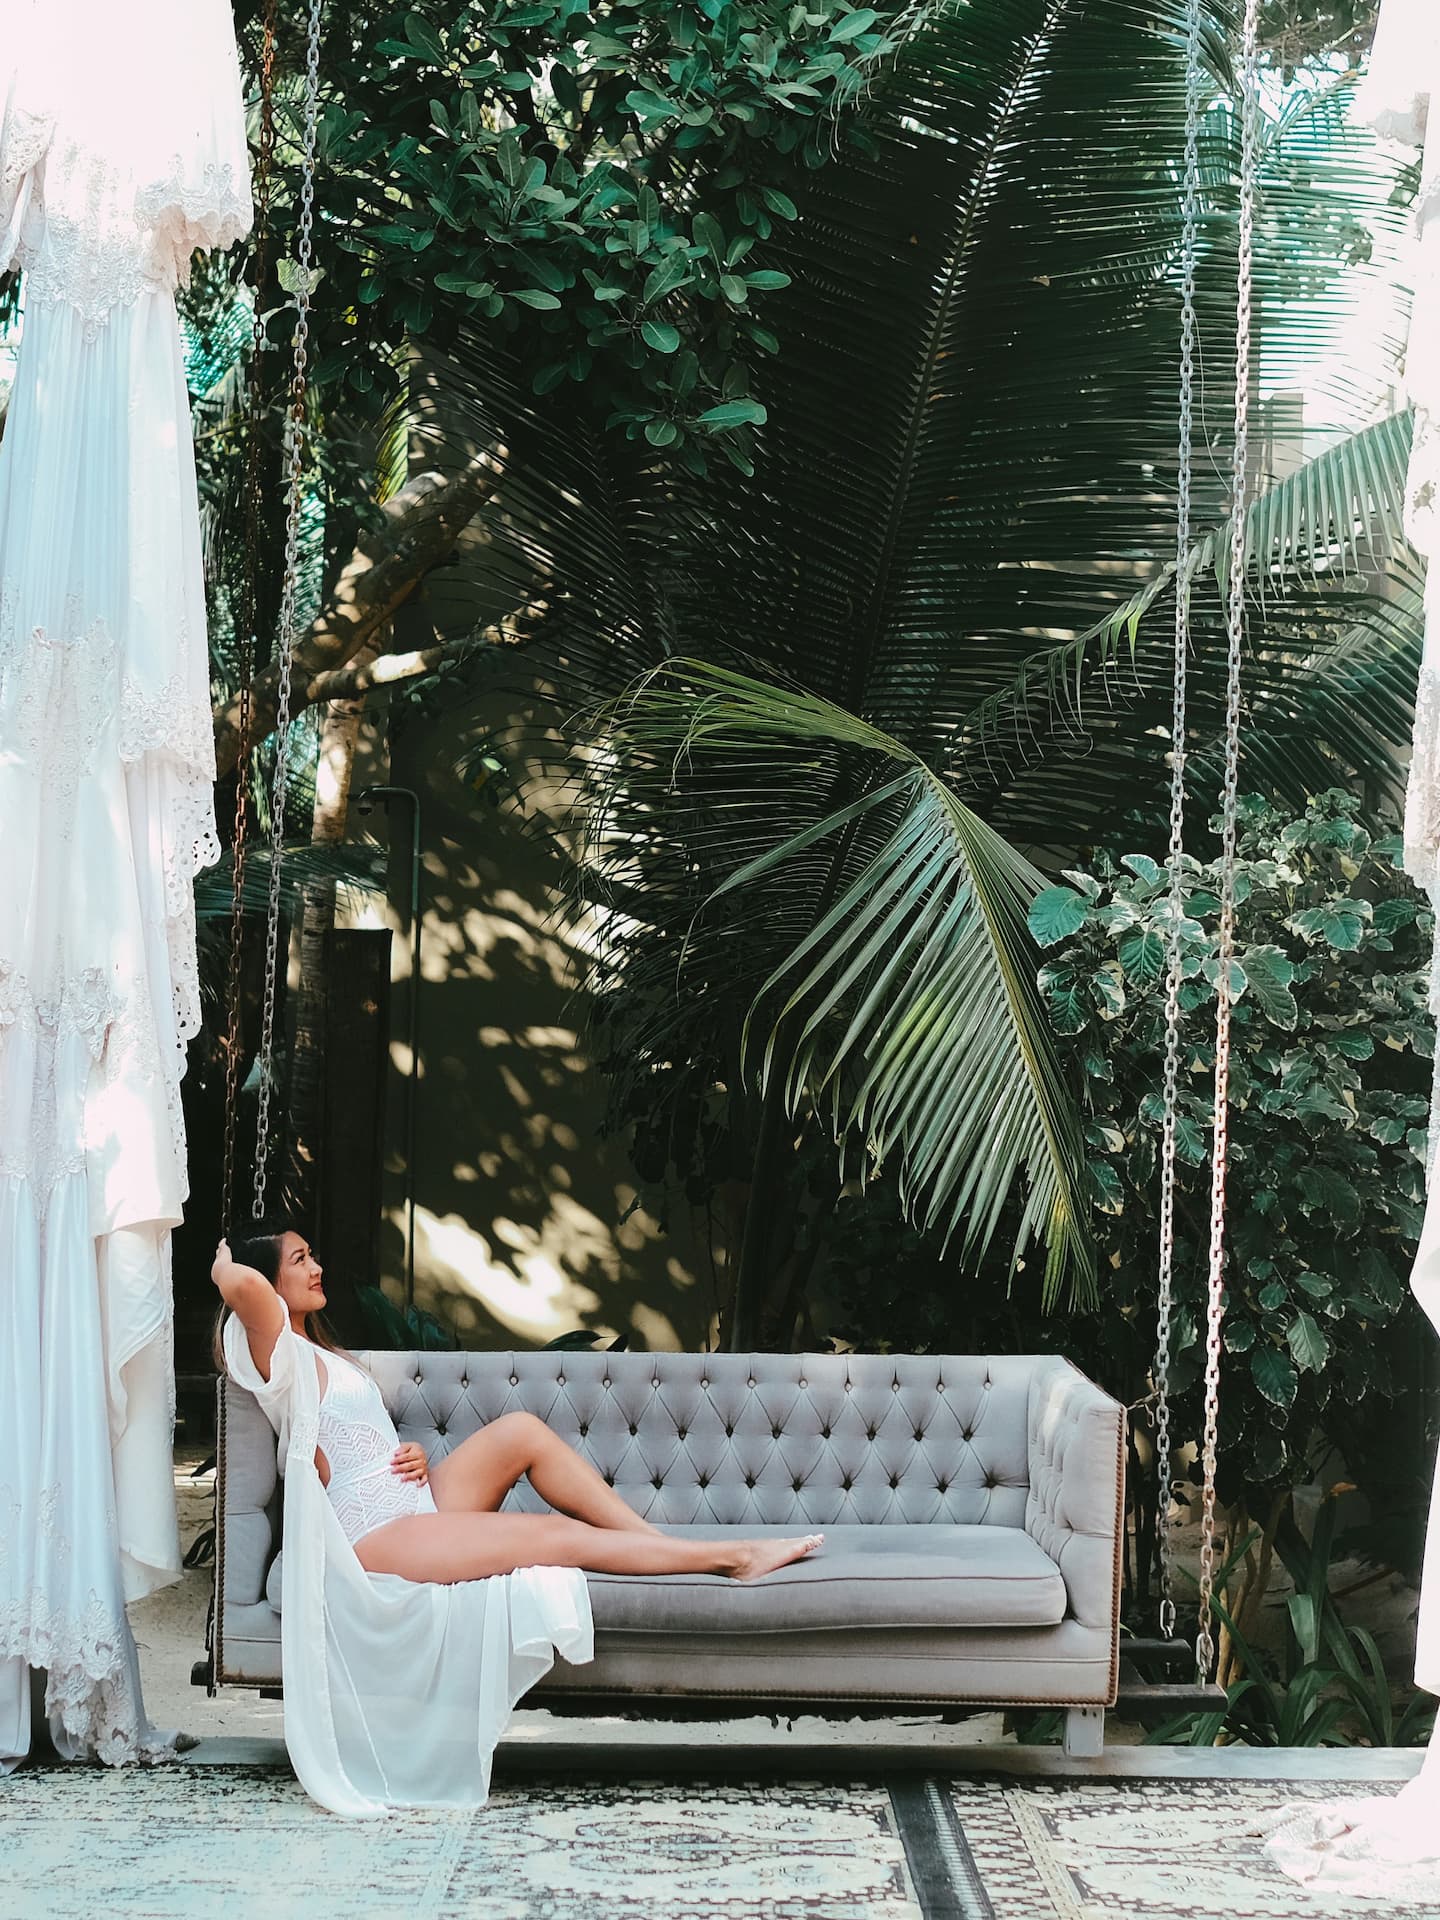 woman in white bathing suit on a hanging couch in tulum mexico